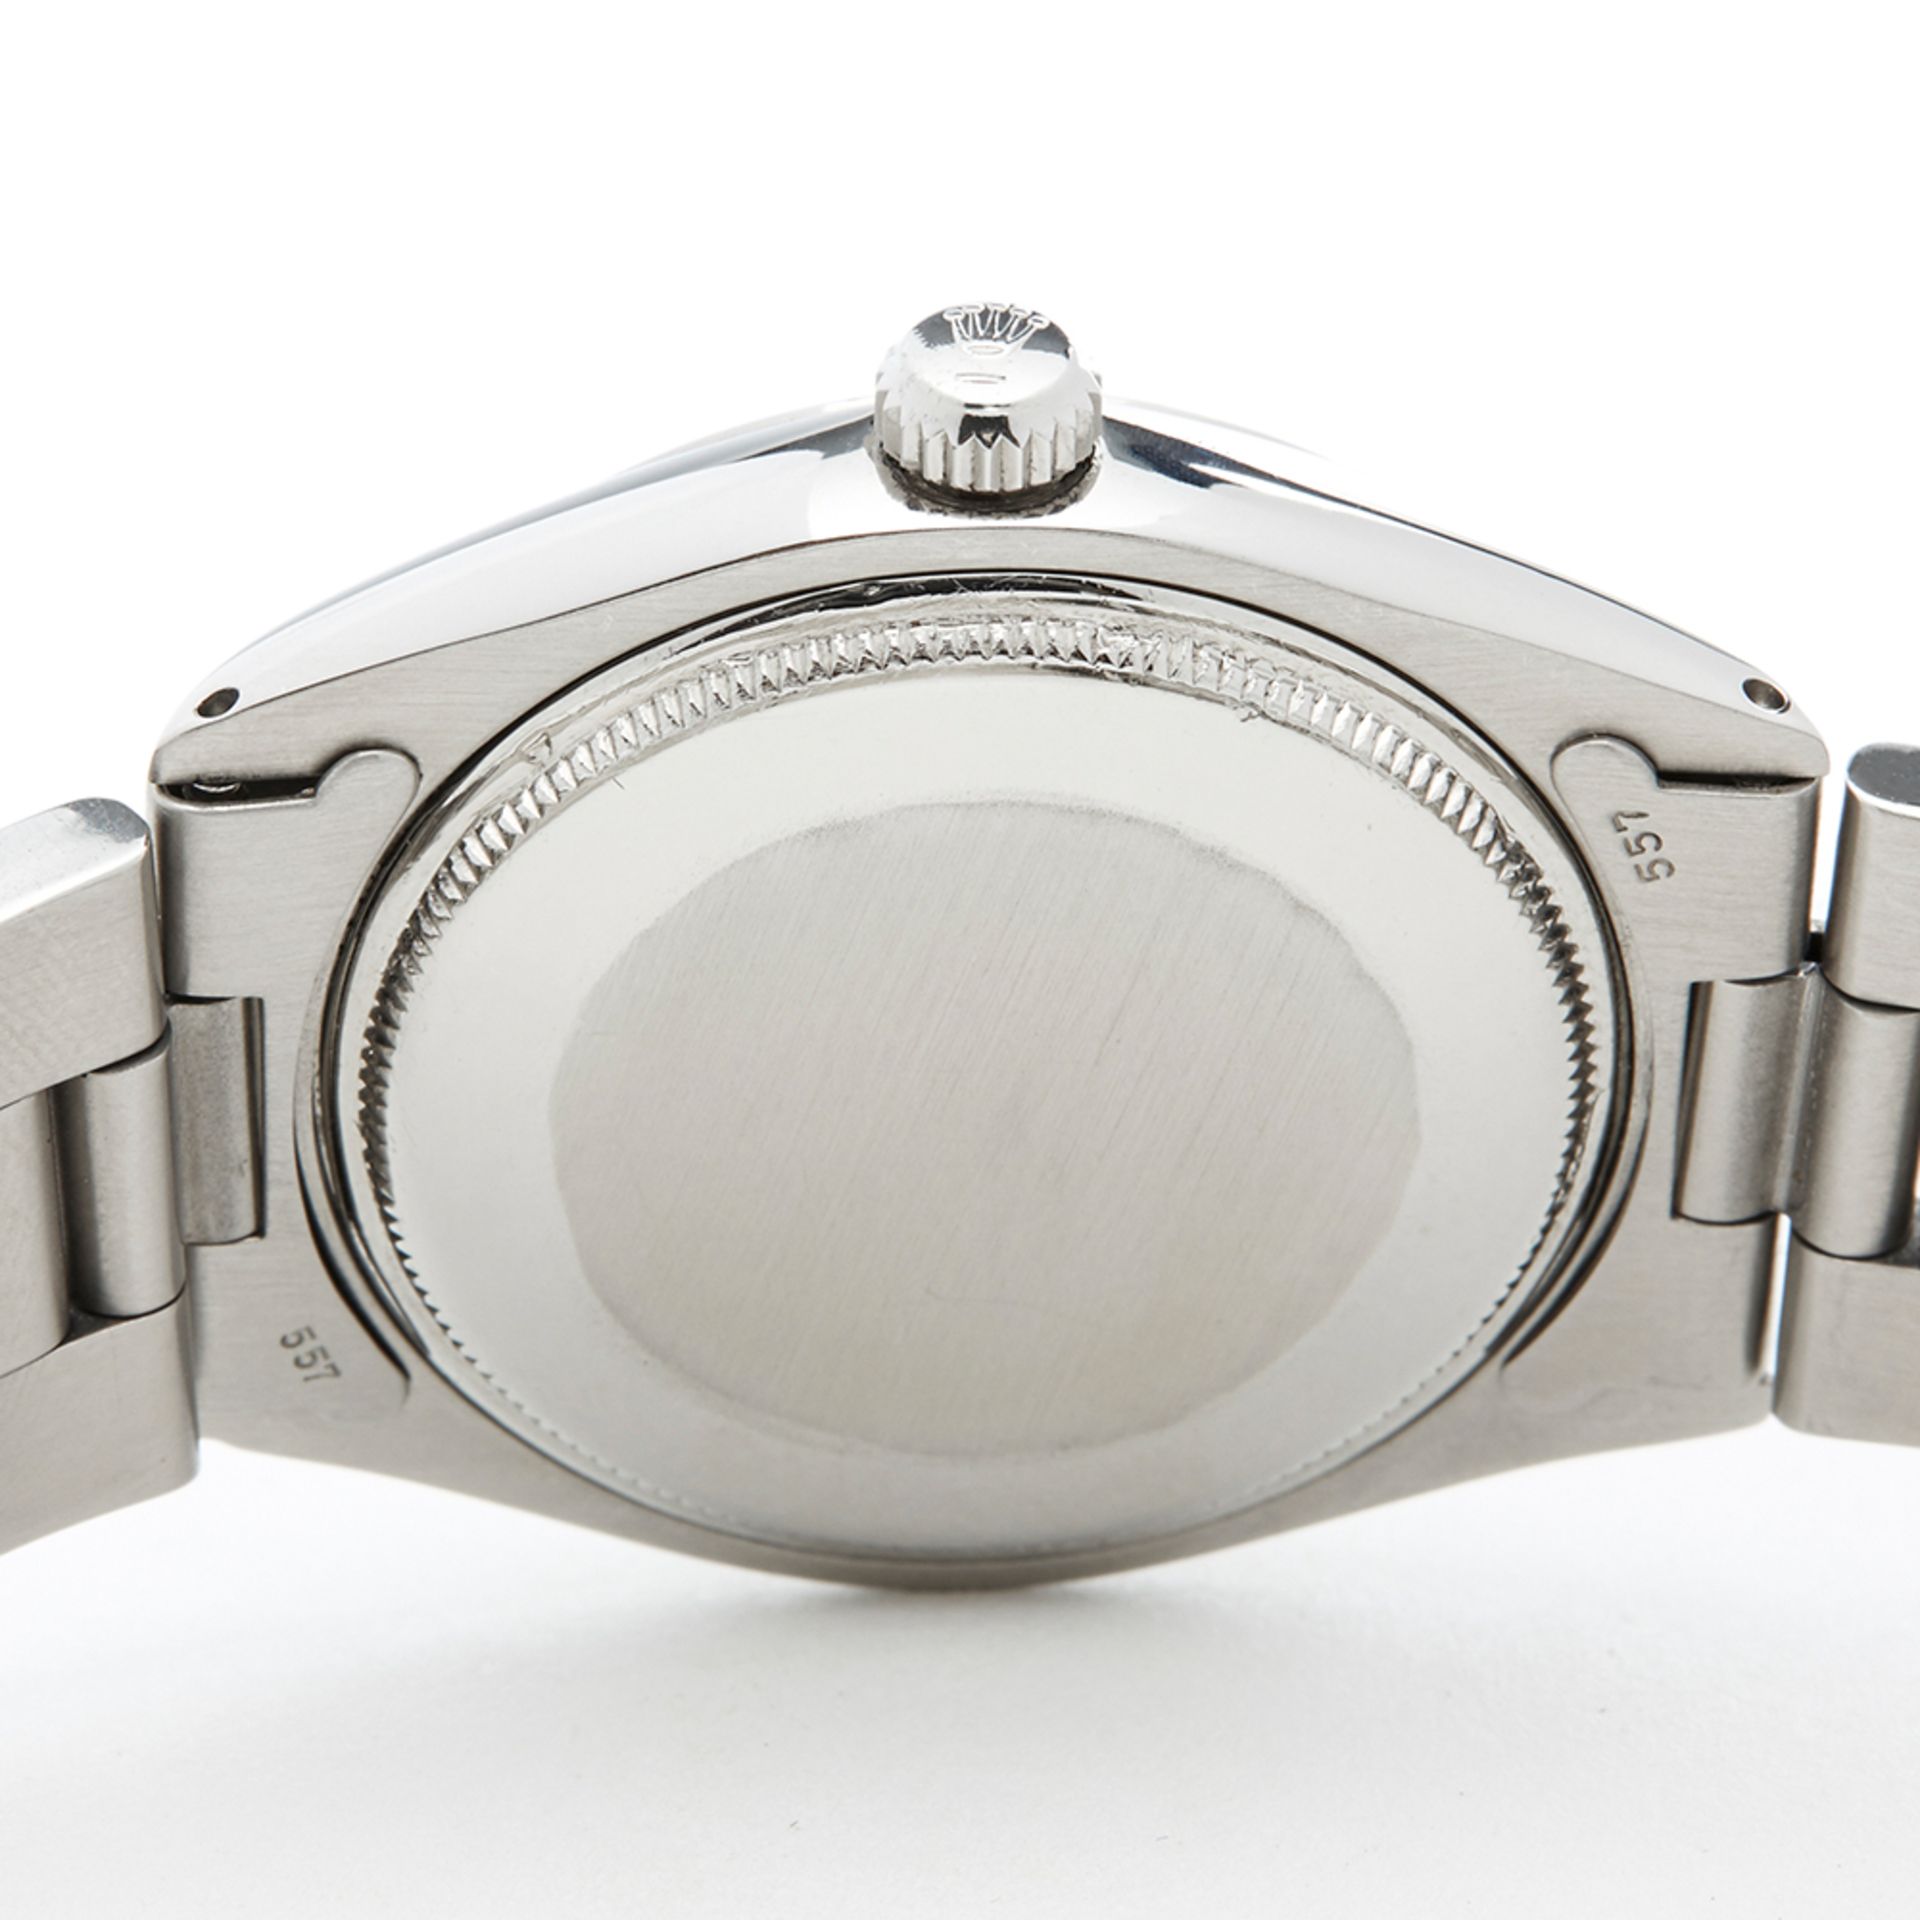 Rolex Oyster Perpetual 34mm Stainless Steel 1002 - Image 8 of 9